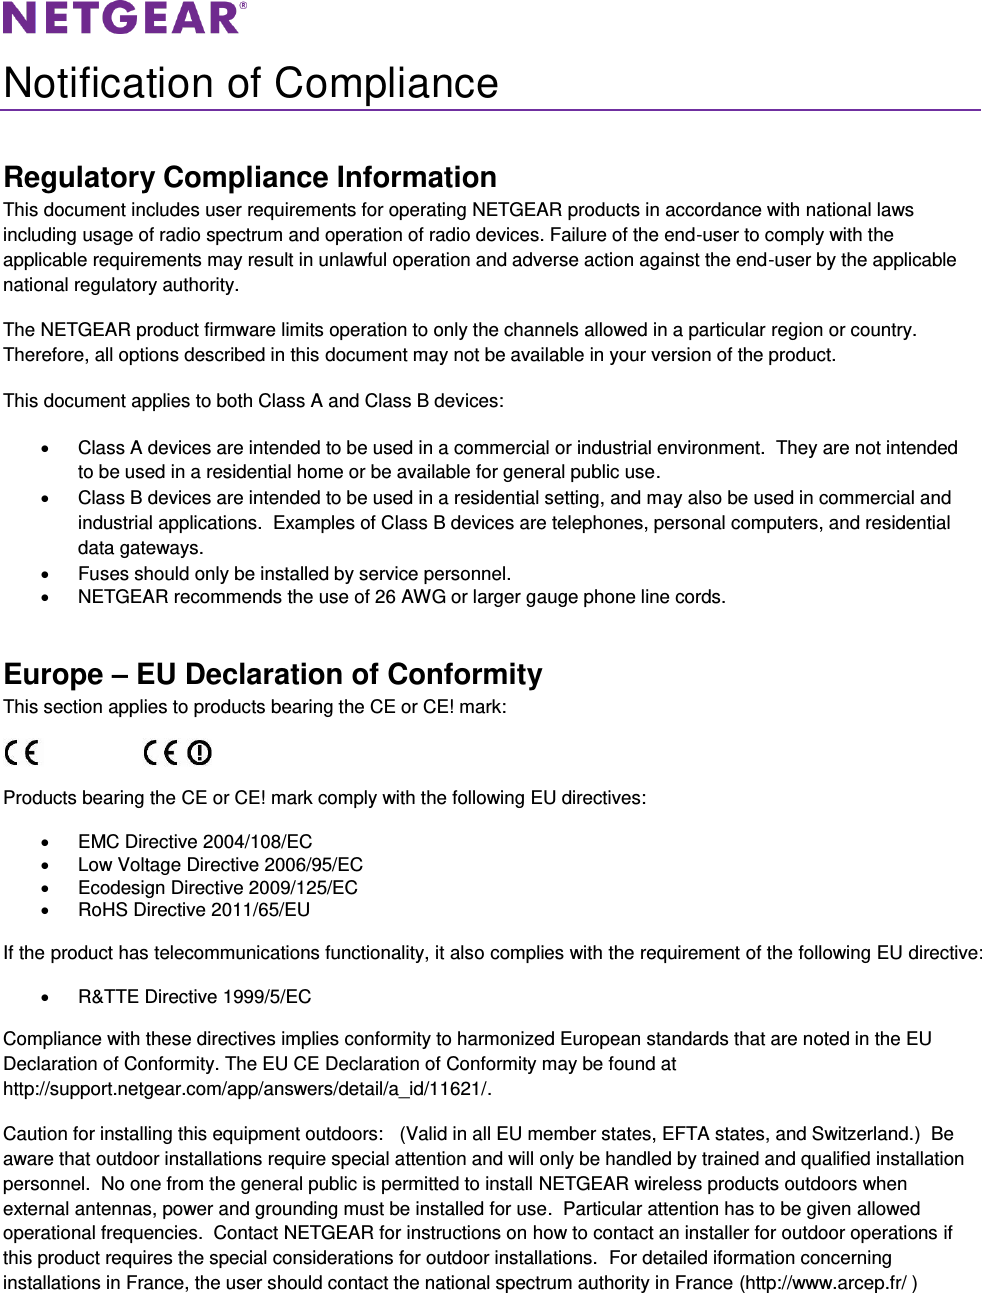   Notification of Compliance Regulatory Compliance Information This document includes user requirements for operating NETGEAR products in accordance with national laws including usage of radio spectrum and operation of radio devices. Failure of the end-user to comply with the applicable requirements may result in unlawful operation and adverse action against the end-user by the applicable national regulatory authority. The NETGEAR product firmware limits operation to only the channels allowed in a particular region or country. Therefore, all options described in this document may not be available in your version of the product. This document applies to both Class A and Class B devices:   Class A devices are intended to be used in a commercial or industrial environment.  They are not intended to be used in a residential home or be available for general public use.   Class B devices are intended to be used in a residential setting, and may also be used in commercial and industrial applications.  Examples of Class B devices are telephones, personal computers, and residential data gateways.   Fuses should only be installed by service personnel.   NETGEAR recommends the use of 26 AWG or larger gauge phone line cords. Europe – EU Declaration of Conformity This section applies to products bearing the CE or CE! mark:                      Products bearing the CE or CE! mark comply with the following EU directives:   EMC Directive 2004/108/EC   Low Voltage Directive 2006/95/EC   Ecodesign Directive 2009/125/EC   RoHS Directive 2011/65/EU If the product has telecommunications functionality, it also complies with the requirement of the following EU directive:   R&amp;TTE Directive 1999/5/EC Compliance with these directives implies conformity to harmonized European standards that are noted in the EU Declaration of Conformity. The EU CE Declaration of Conformity may be found at http://support.netgear.com/app/answers/detail/a_id/11621/. Caution for installing this equipment outdoors:   (Valid in all EU member states, EFTA states, and Switzerland.)  Be aware that outdoor installations require special attention and will only be handled by trained and qualified installation personnel.  No one from the general public is permitted to install NETGEAR wireless products outdoors when external antennas, power and grounding must be installed for use.  Particular attention has to be given allowed operational frequencies.  Contact NETGEAR for instructions on how to contact an installer for outdoor operations if this product requires the special considerations for outdoor installations.  For detailed iformation concerning installations in France, the user should contact the national spectrum authority in France (http://www.arcep.fr/ )  